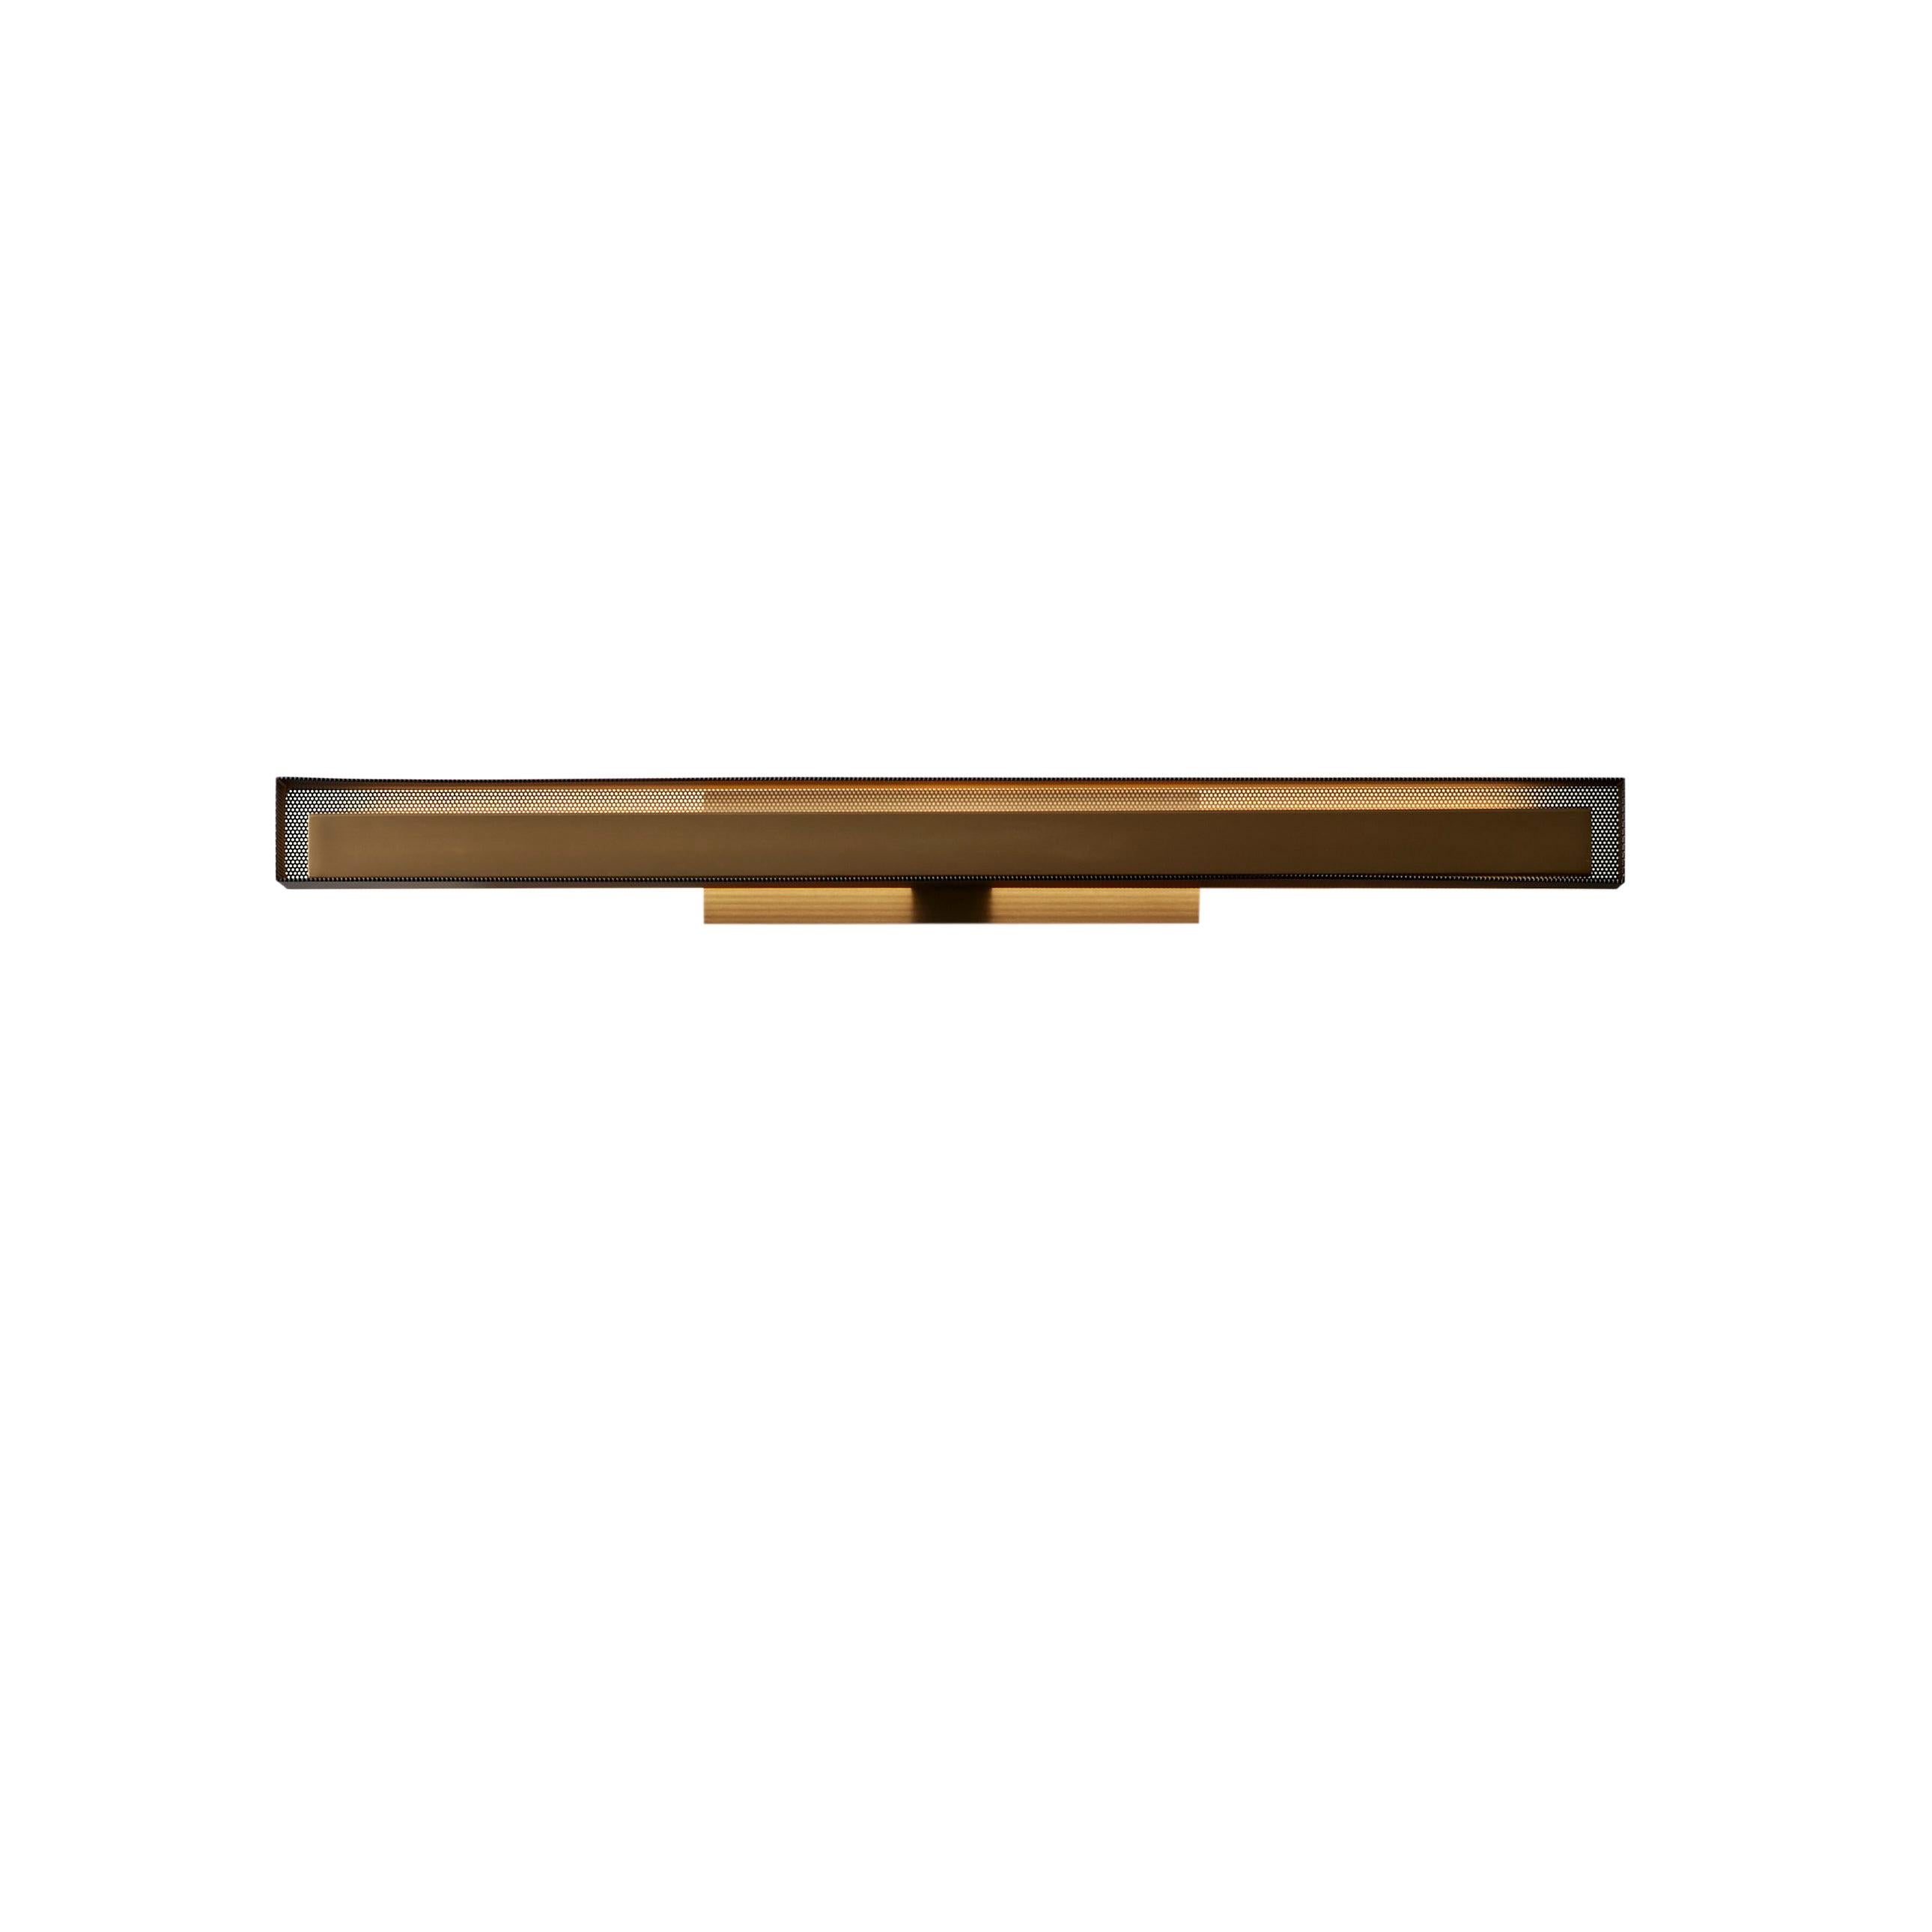 VeniceM Urban Lightline Wall Light in Burnished Brass & Metal by Massimo Tonetto